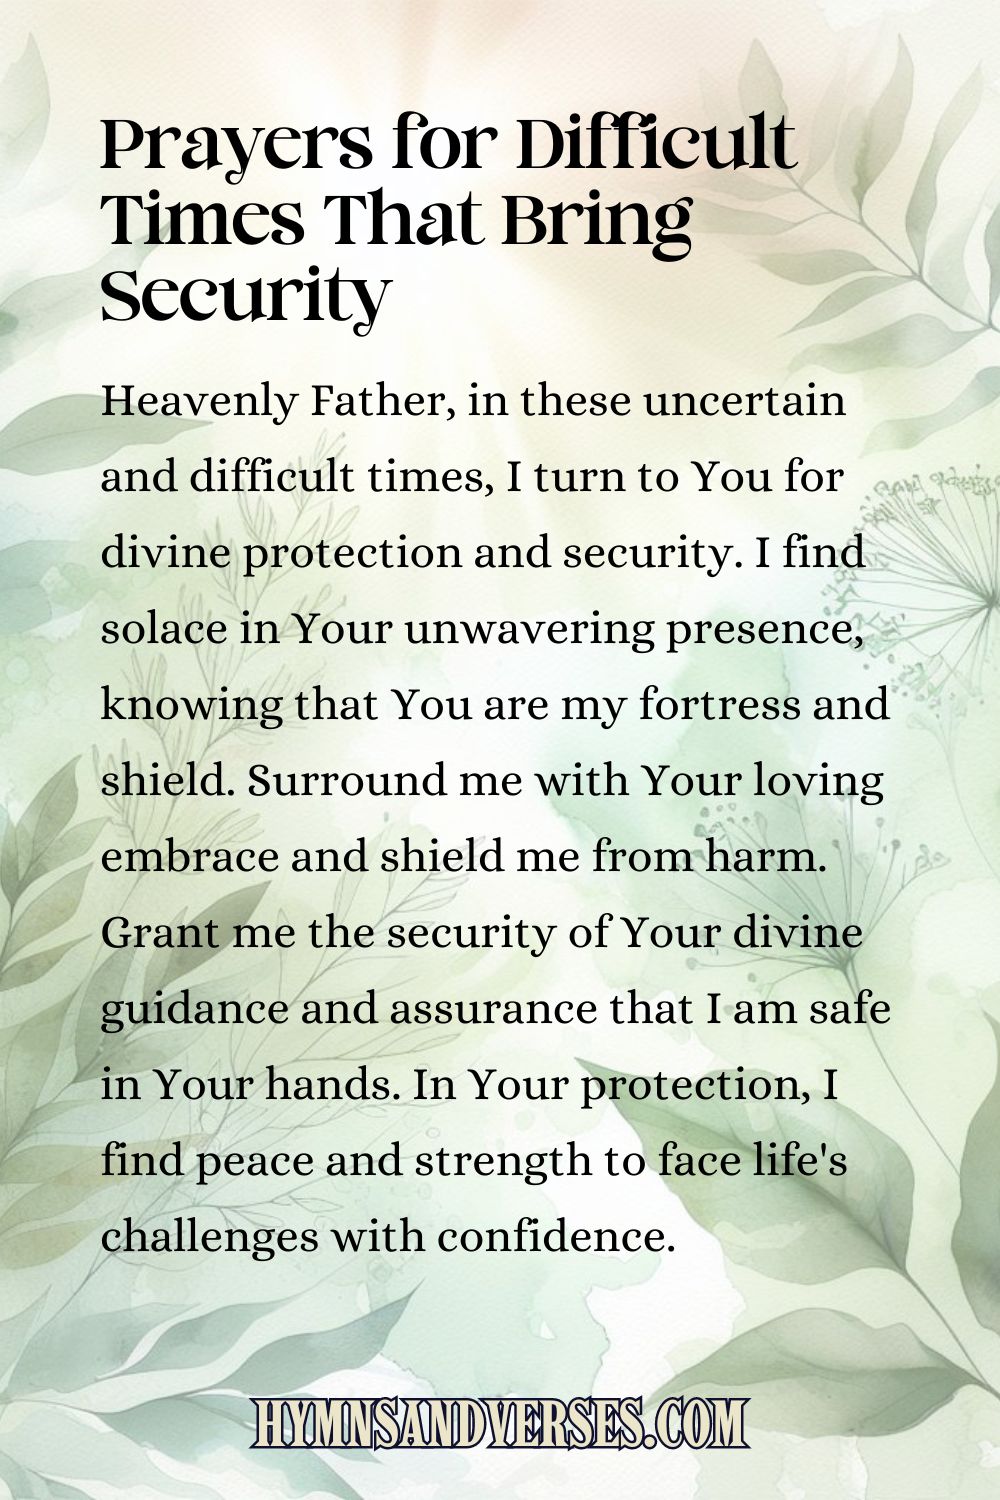 Pin sized image for Prayers for Difficult Times That Bring Security, reads:  Heavenly Father, in these uncertain and difficult times, I turn to You for divine protection and security. I find solace in Your unwavering presence, knowing that You are my fortress and shield. Surround me with Your loving embrace and shield me from harm. Grant me the security of Your divine guidance and assurance that I am safe in Your hands. In Your protection, I find peace and strength to face life's challenges with confidence.